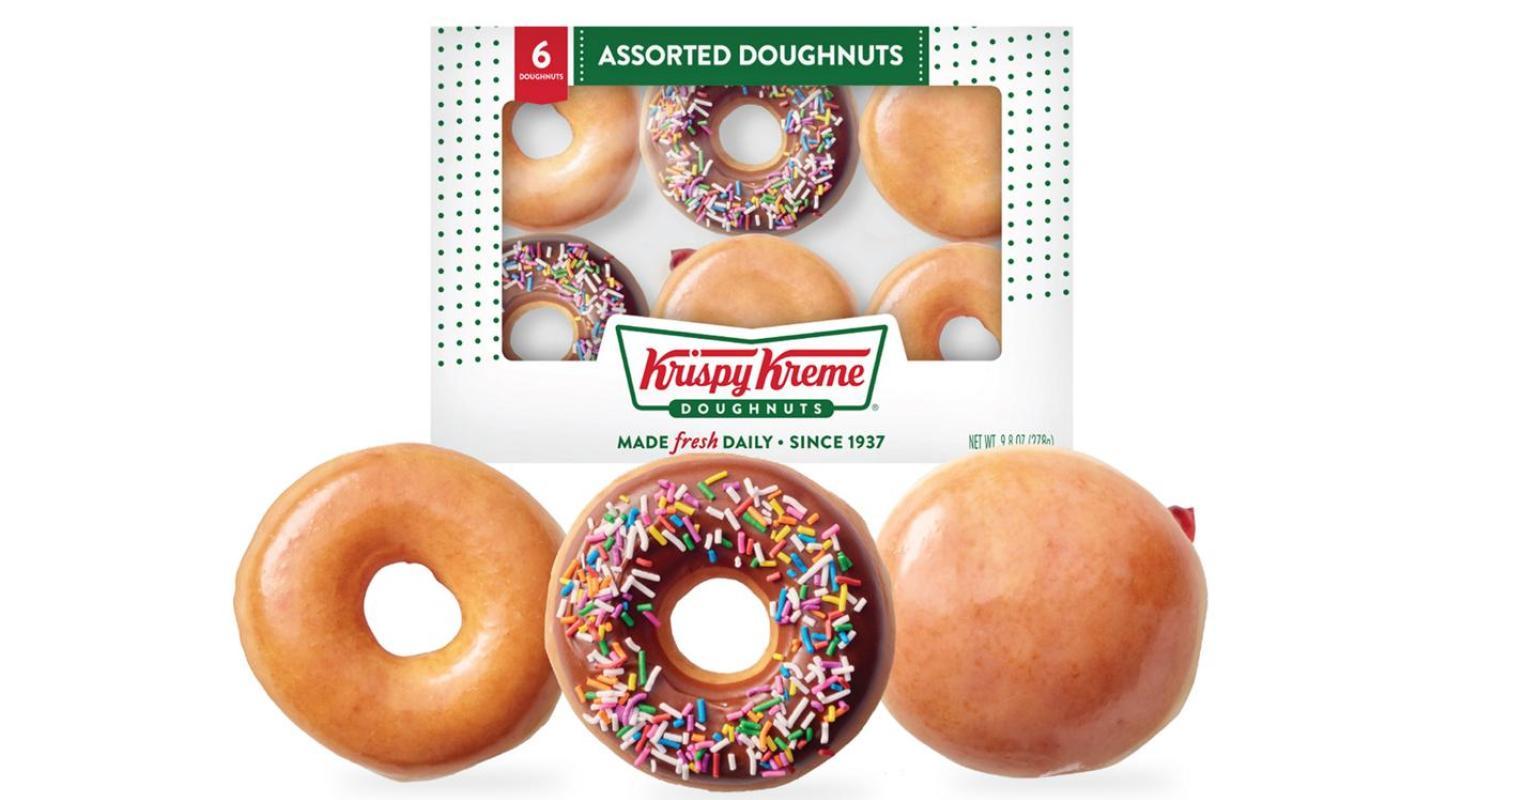 Krispy Kreme and McDonald’s are expanding their relationship